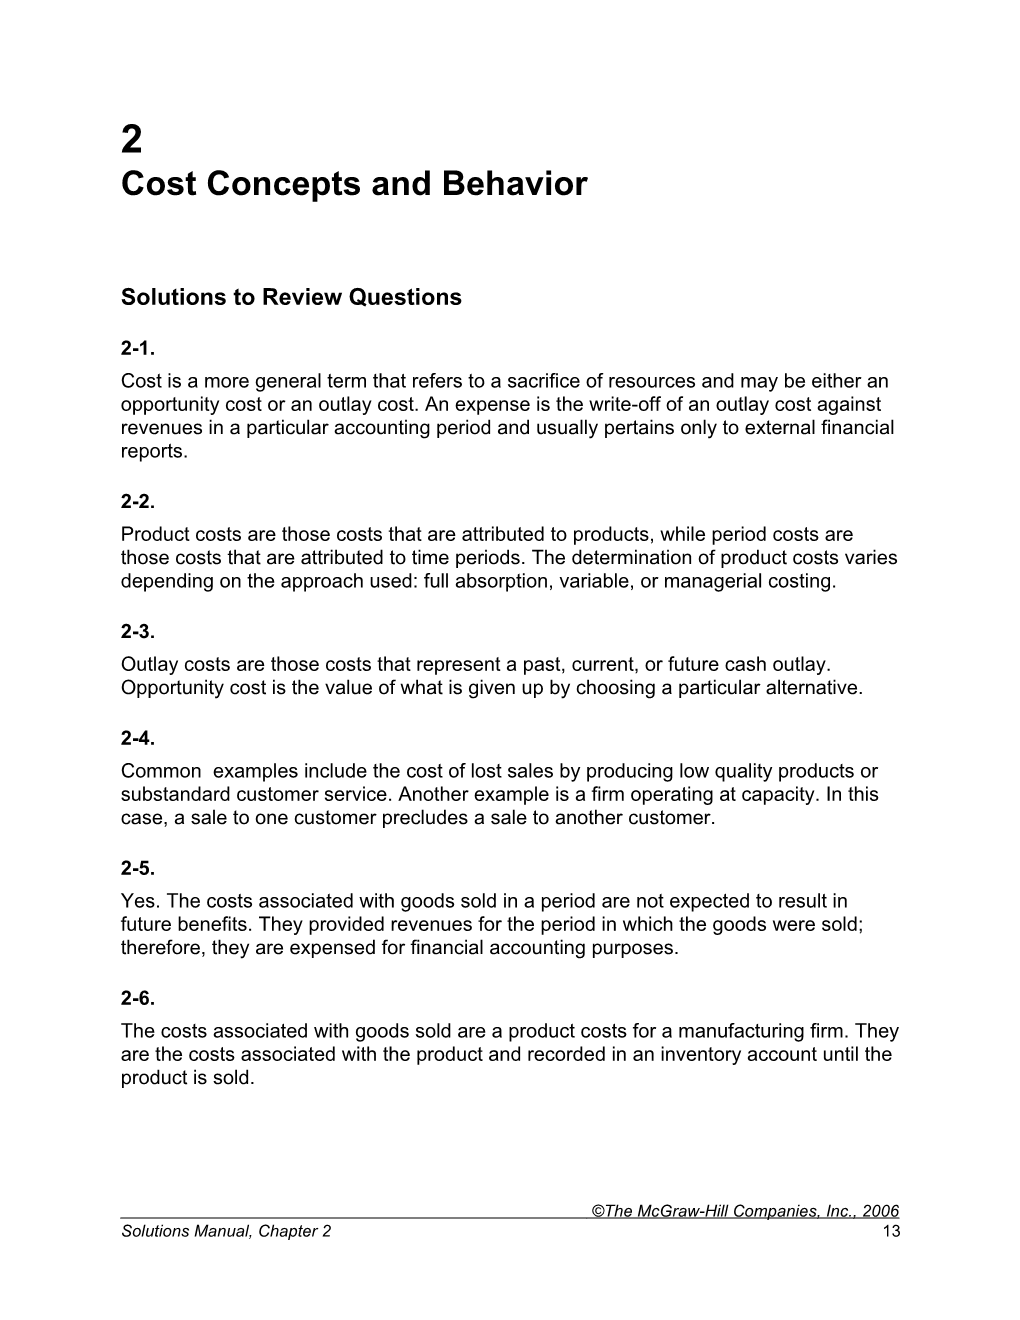 Cost Concepts and Behavior s1